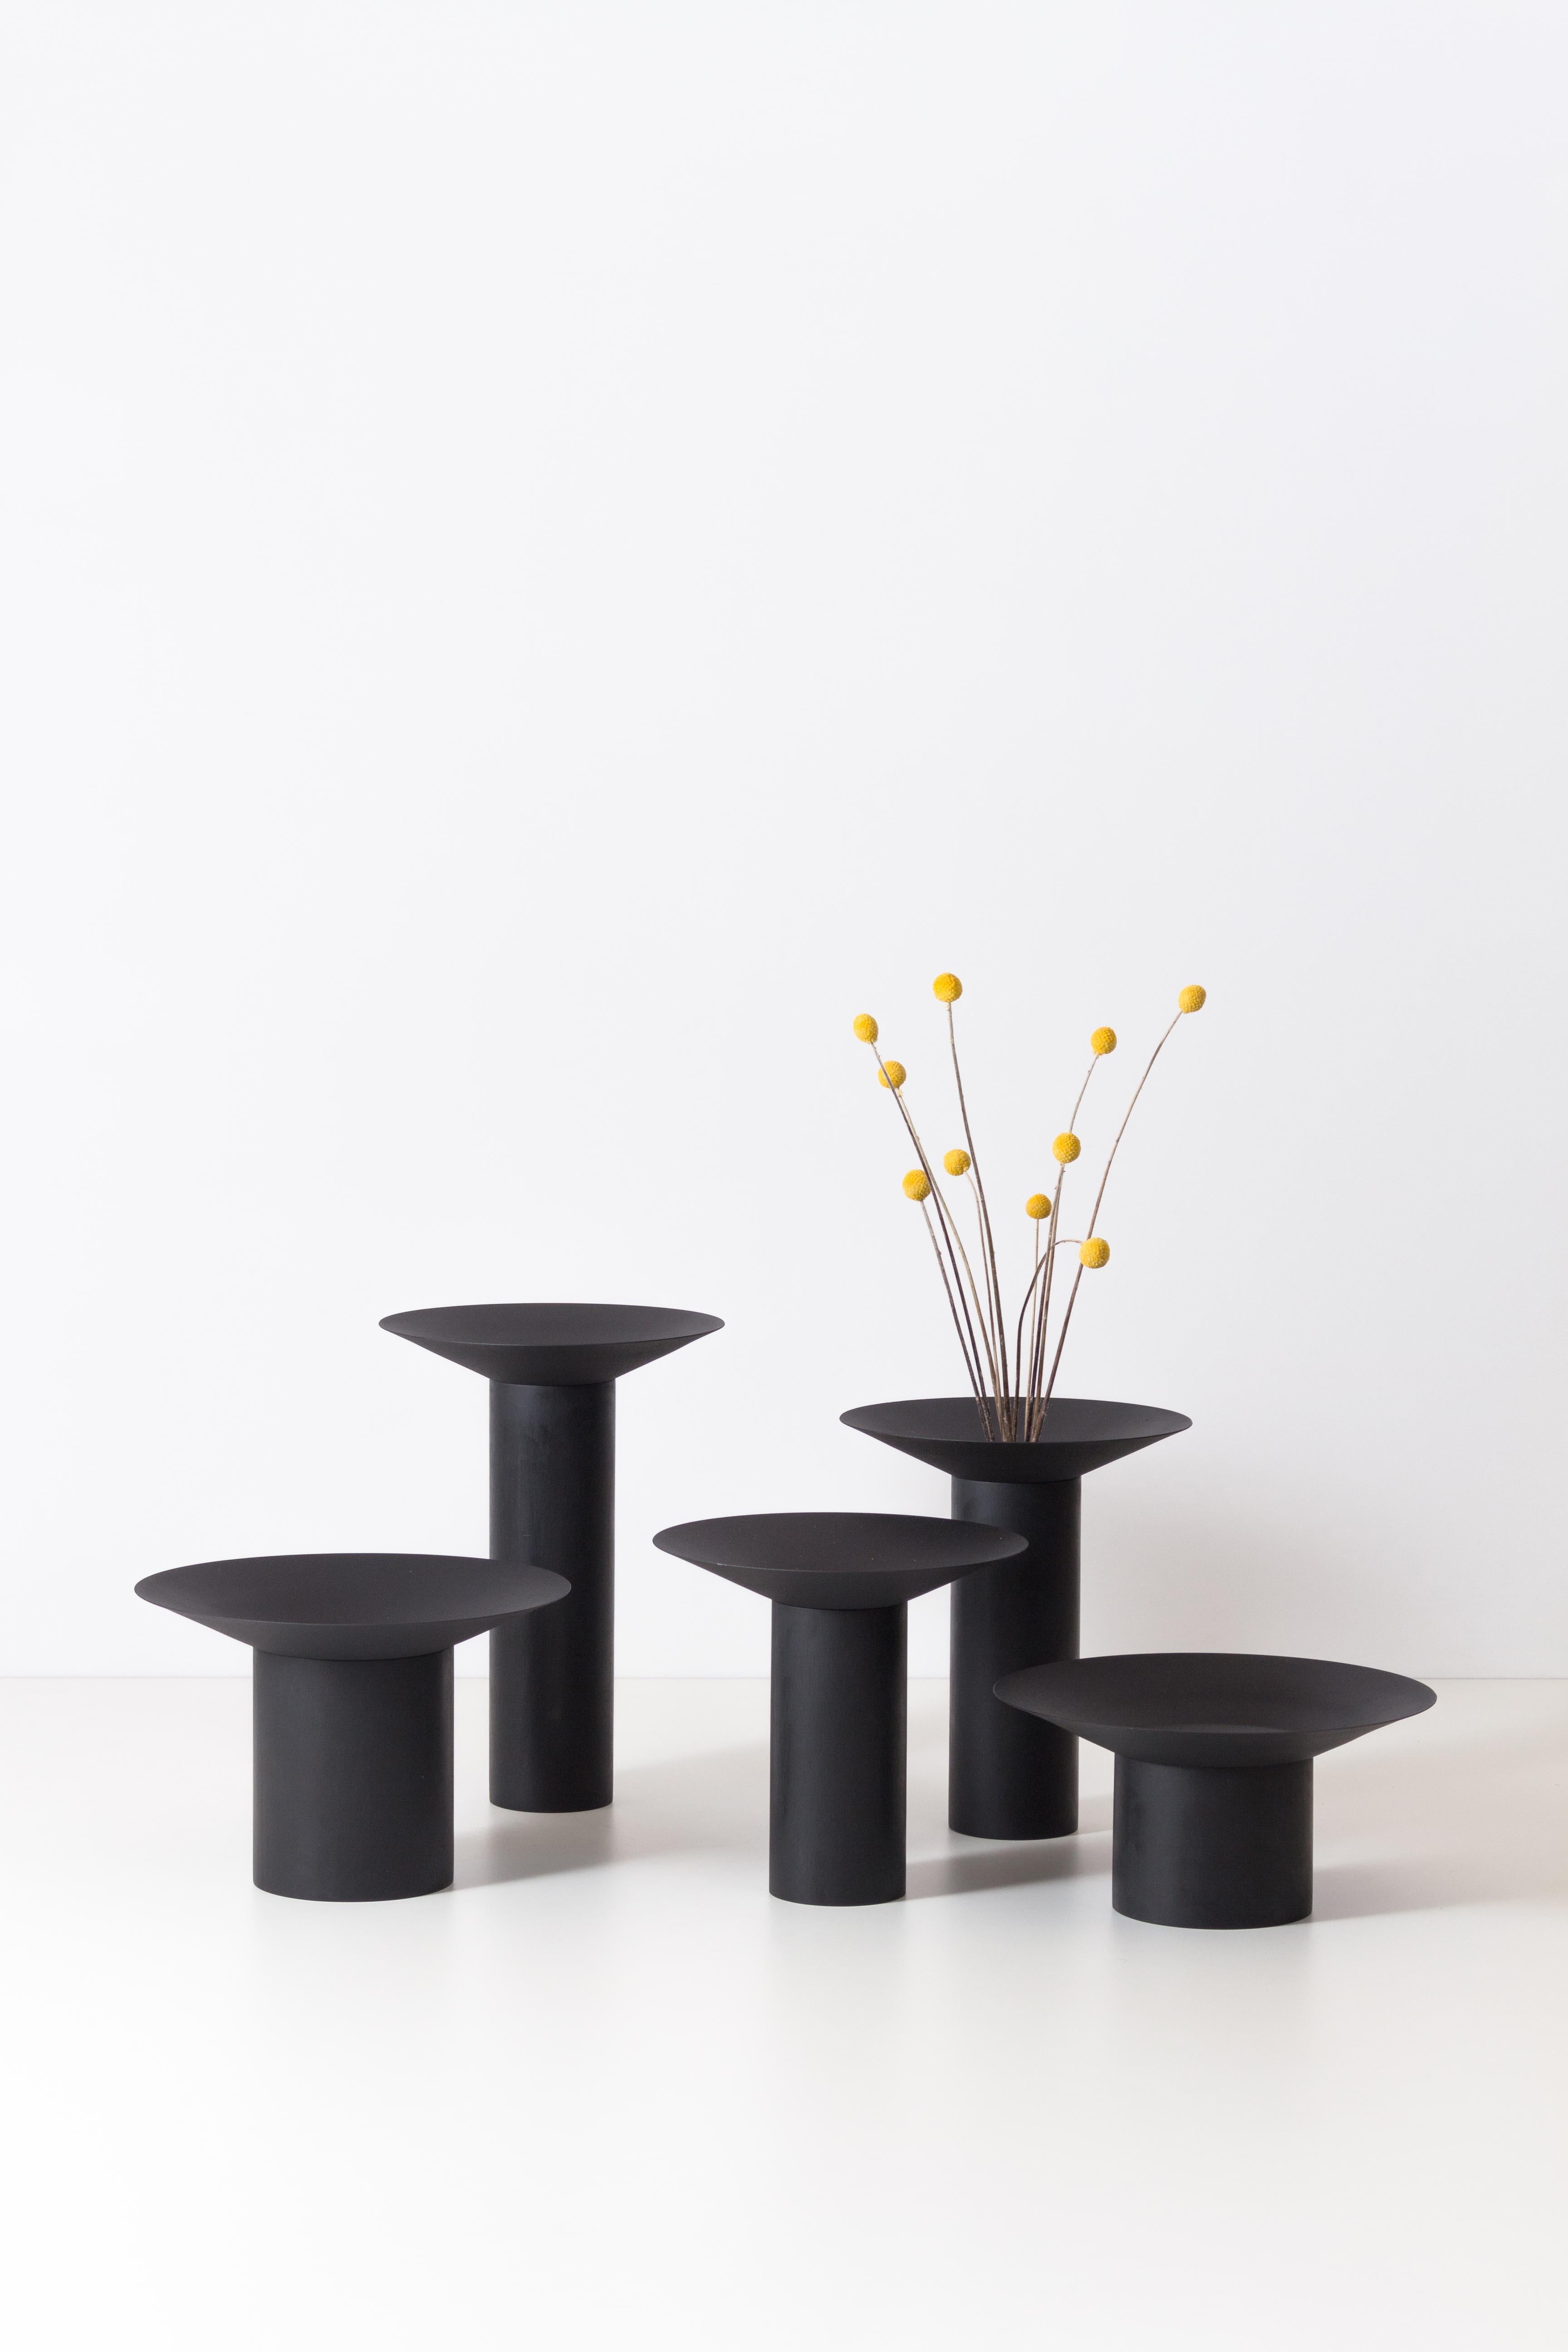 Inspired by the juxtaposition of the tree crowns, the Dossel Collection comprises five vases that can be both used individually or in conjunction, as vases, fruit bowls or as decorative elements.

The metal part of the vases has a cavity that can be